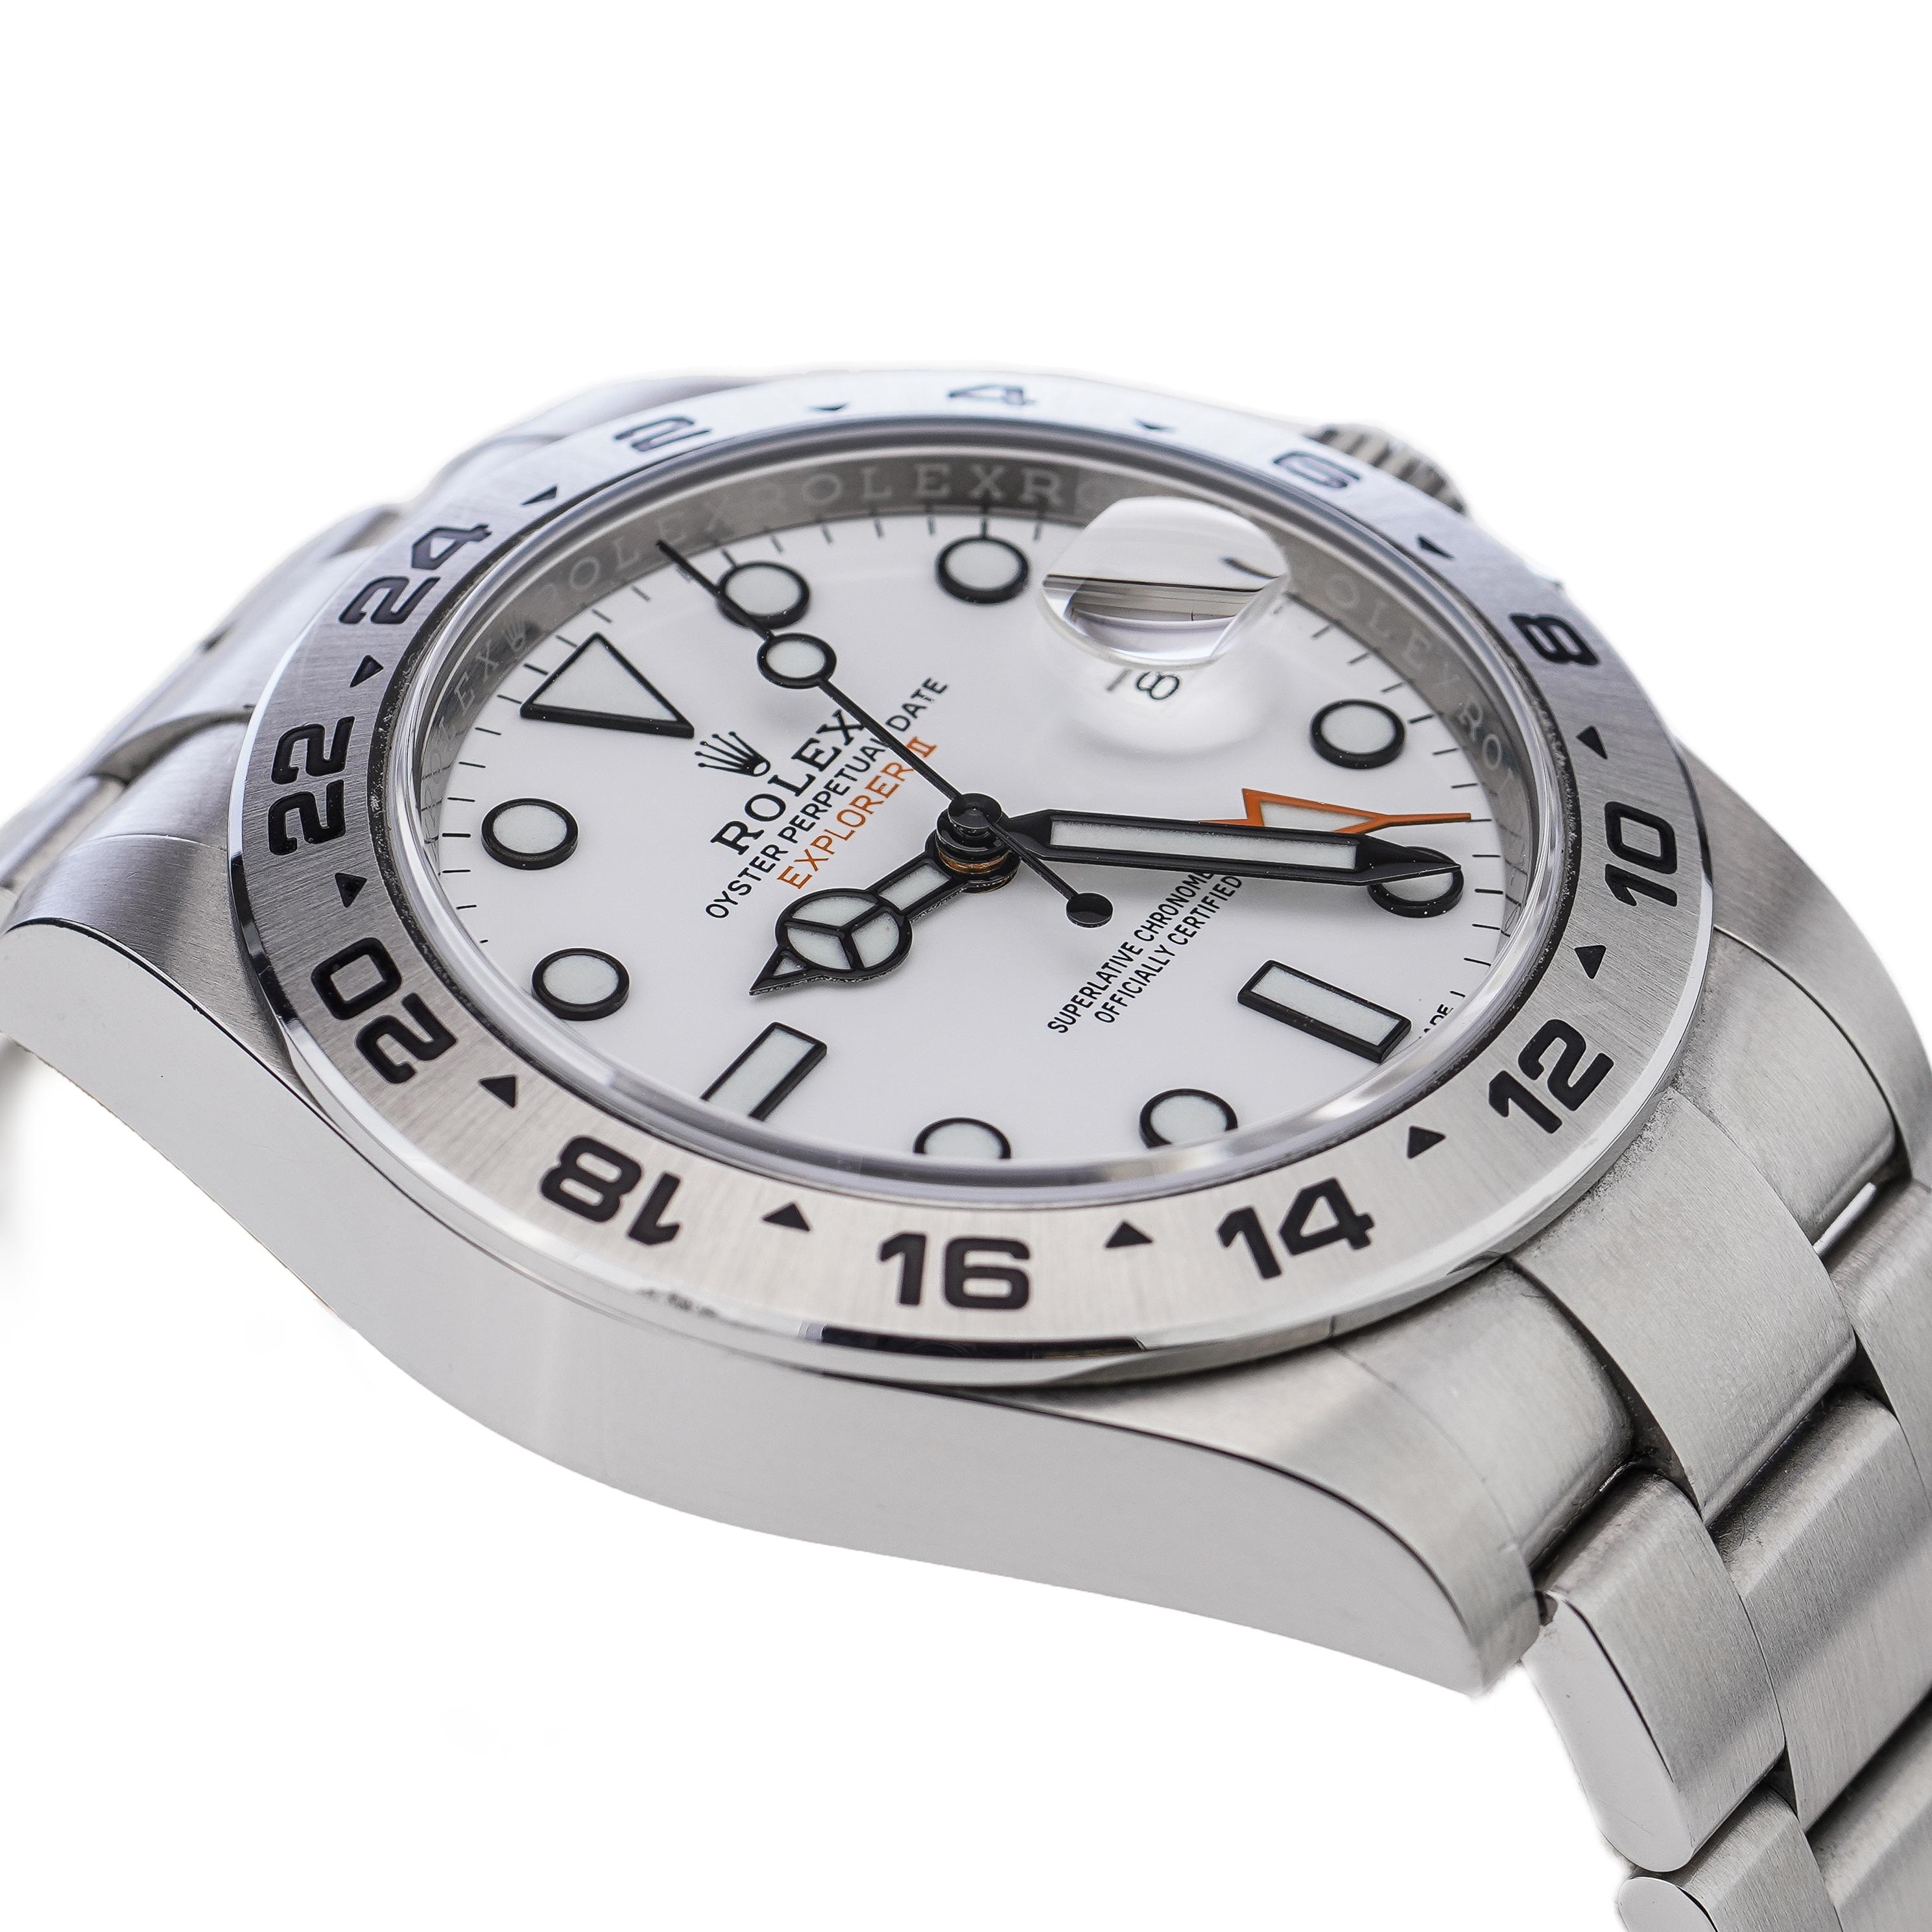 Rolex Oyster Perpetual Explorer II 216570 For Sale 1